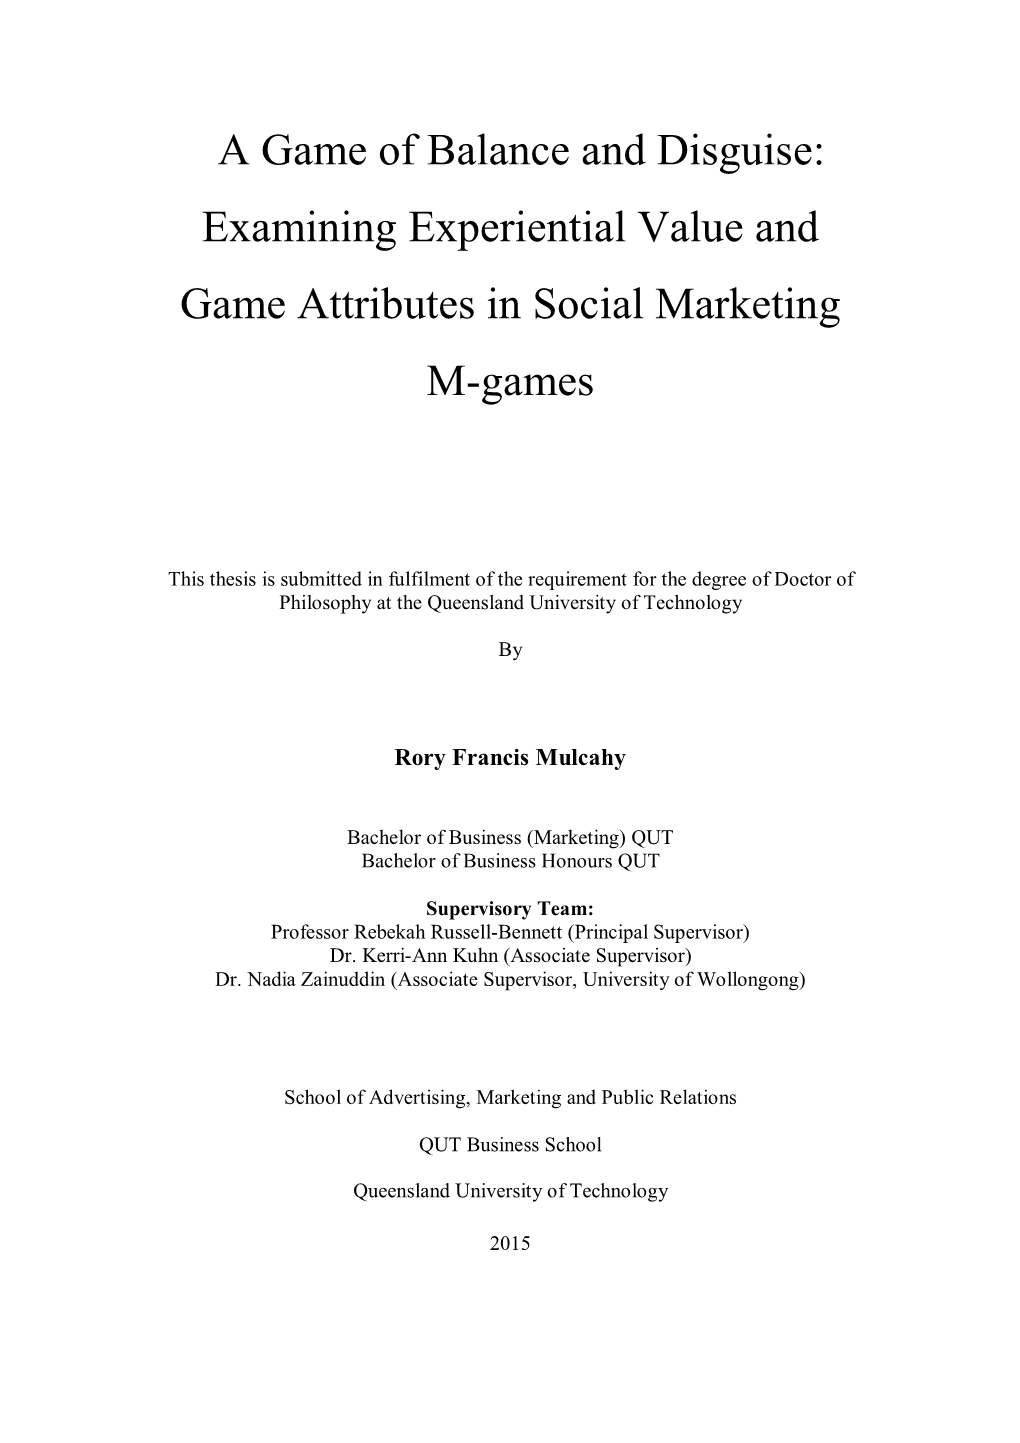 Examining Experiential Value and Game Attributes in Social Marketing M-Games